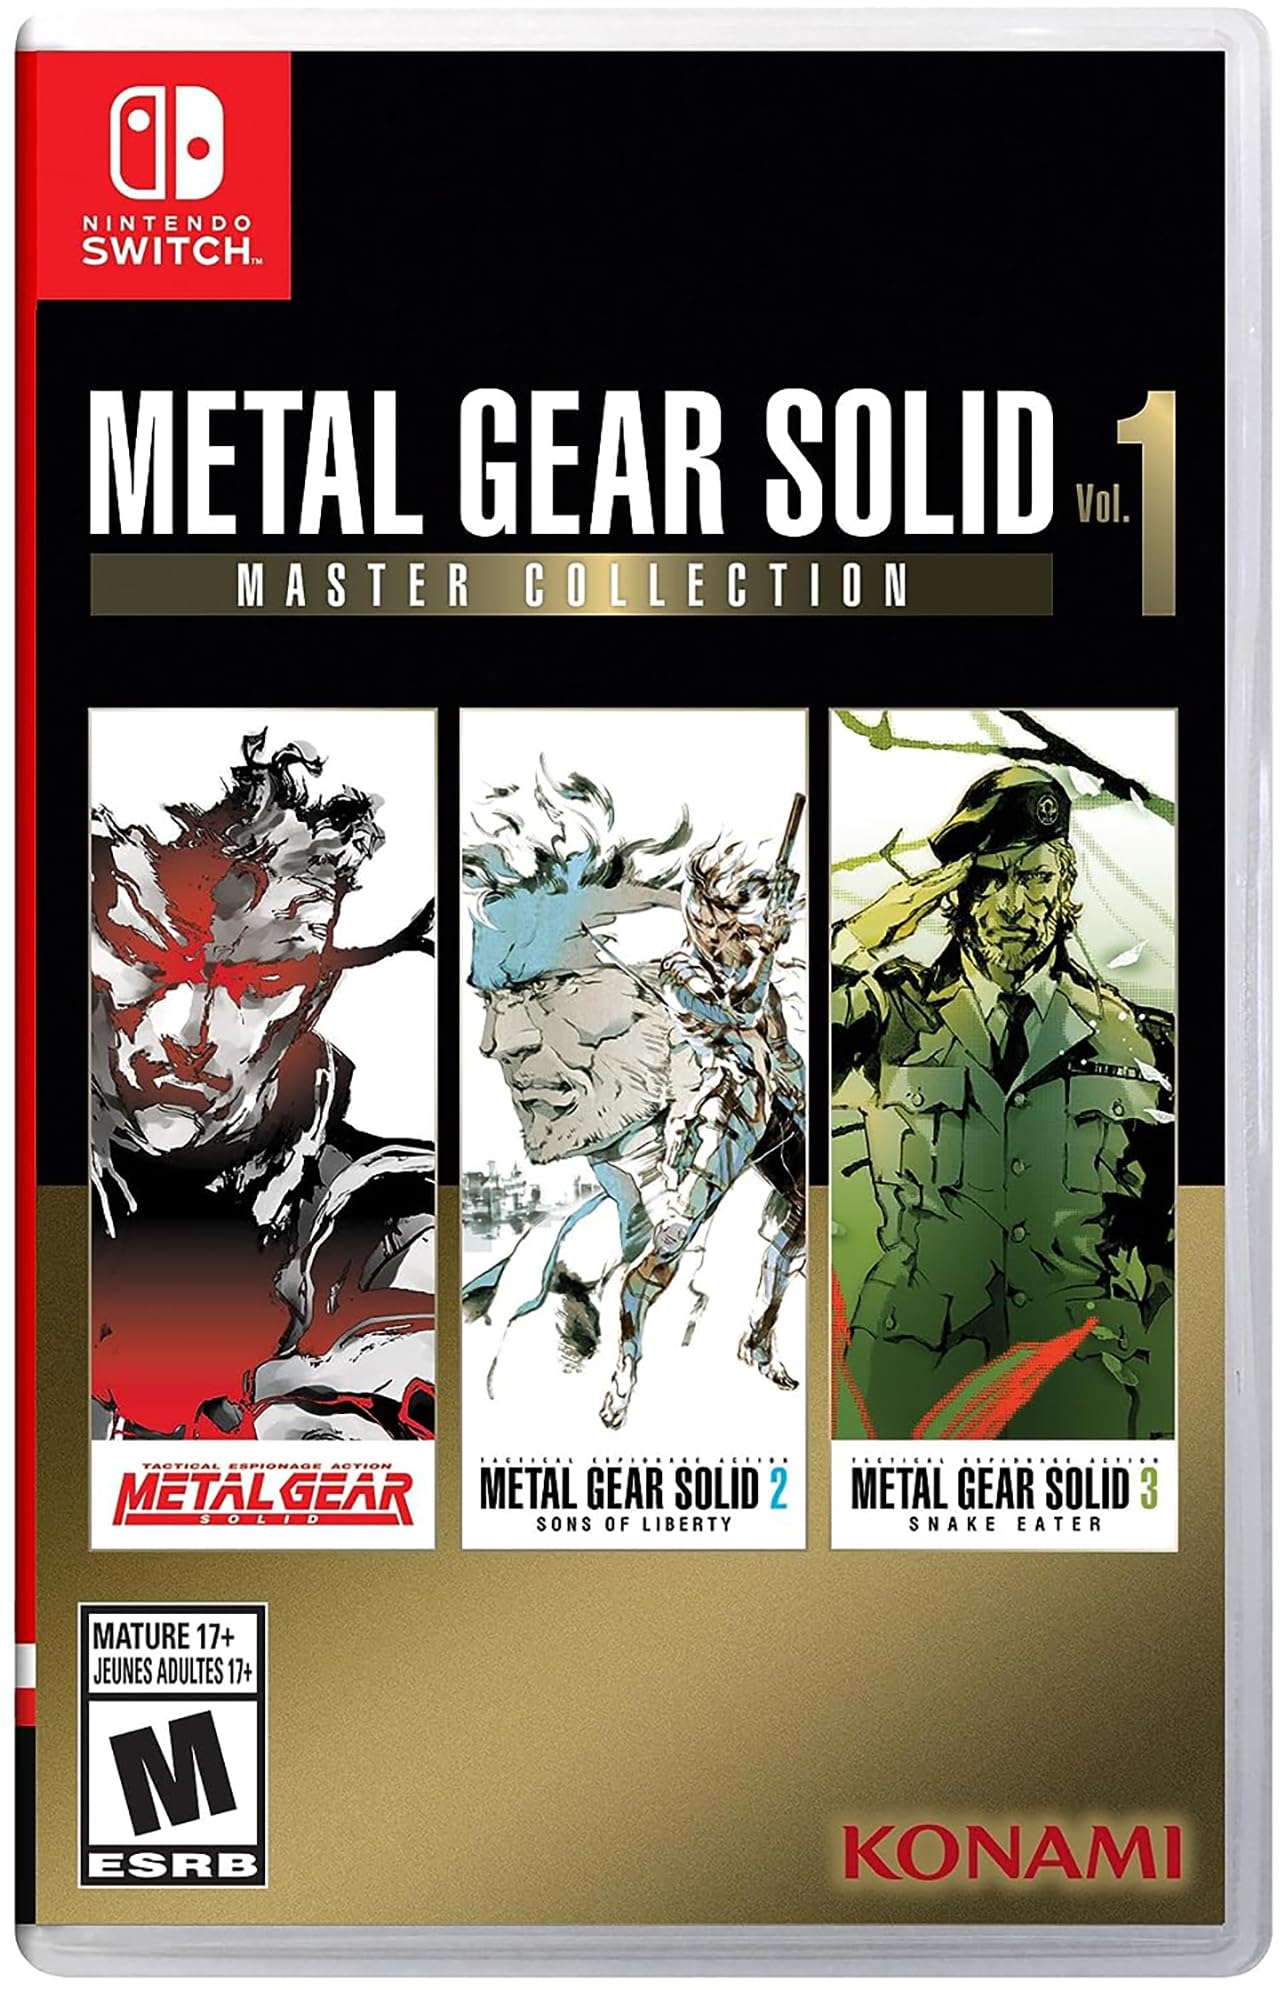 Metal Gear Solid: Master Collection Vol.1 (Nintendo Switch, Physical) $44.96 + Free Shipping